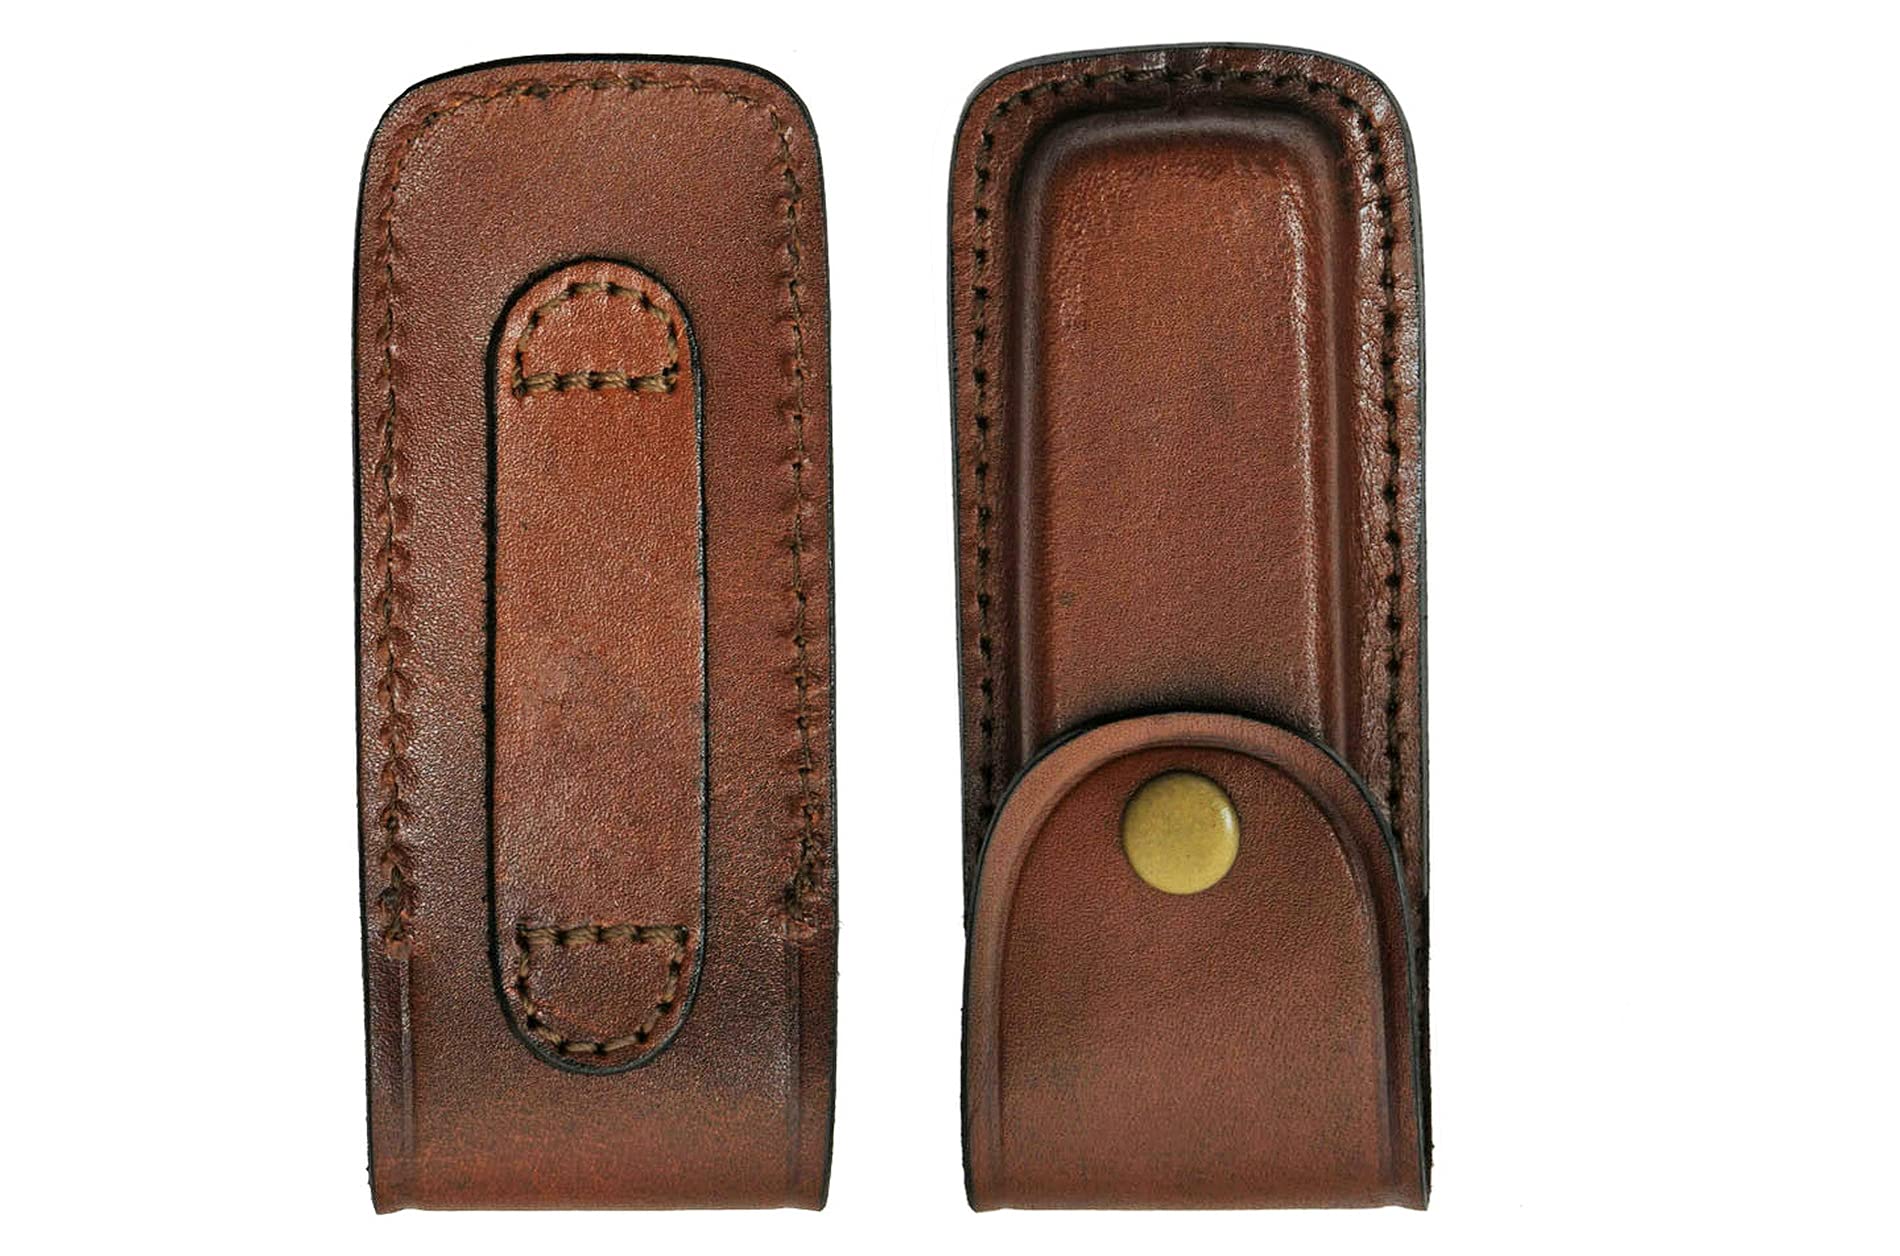 New Folding Pro Tactical Knife Sheath Brown Real Leather Snap-Button Case for 5" inch Folding Knives Survival Camping Outdoor Knife TG-0968M by ProTacticalUS